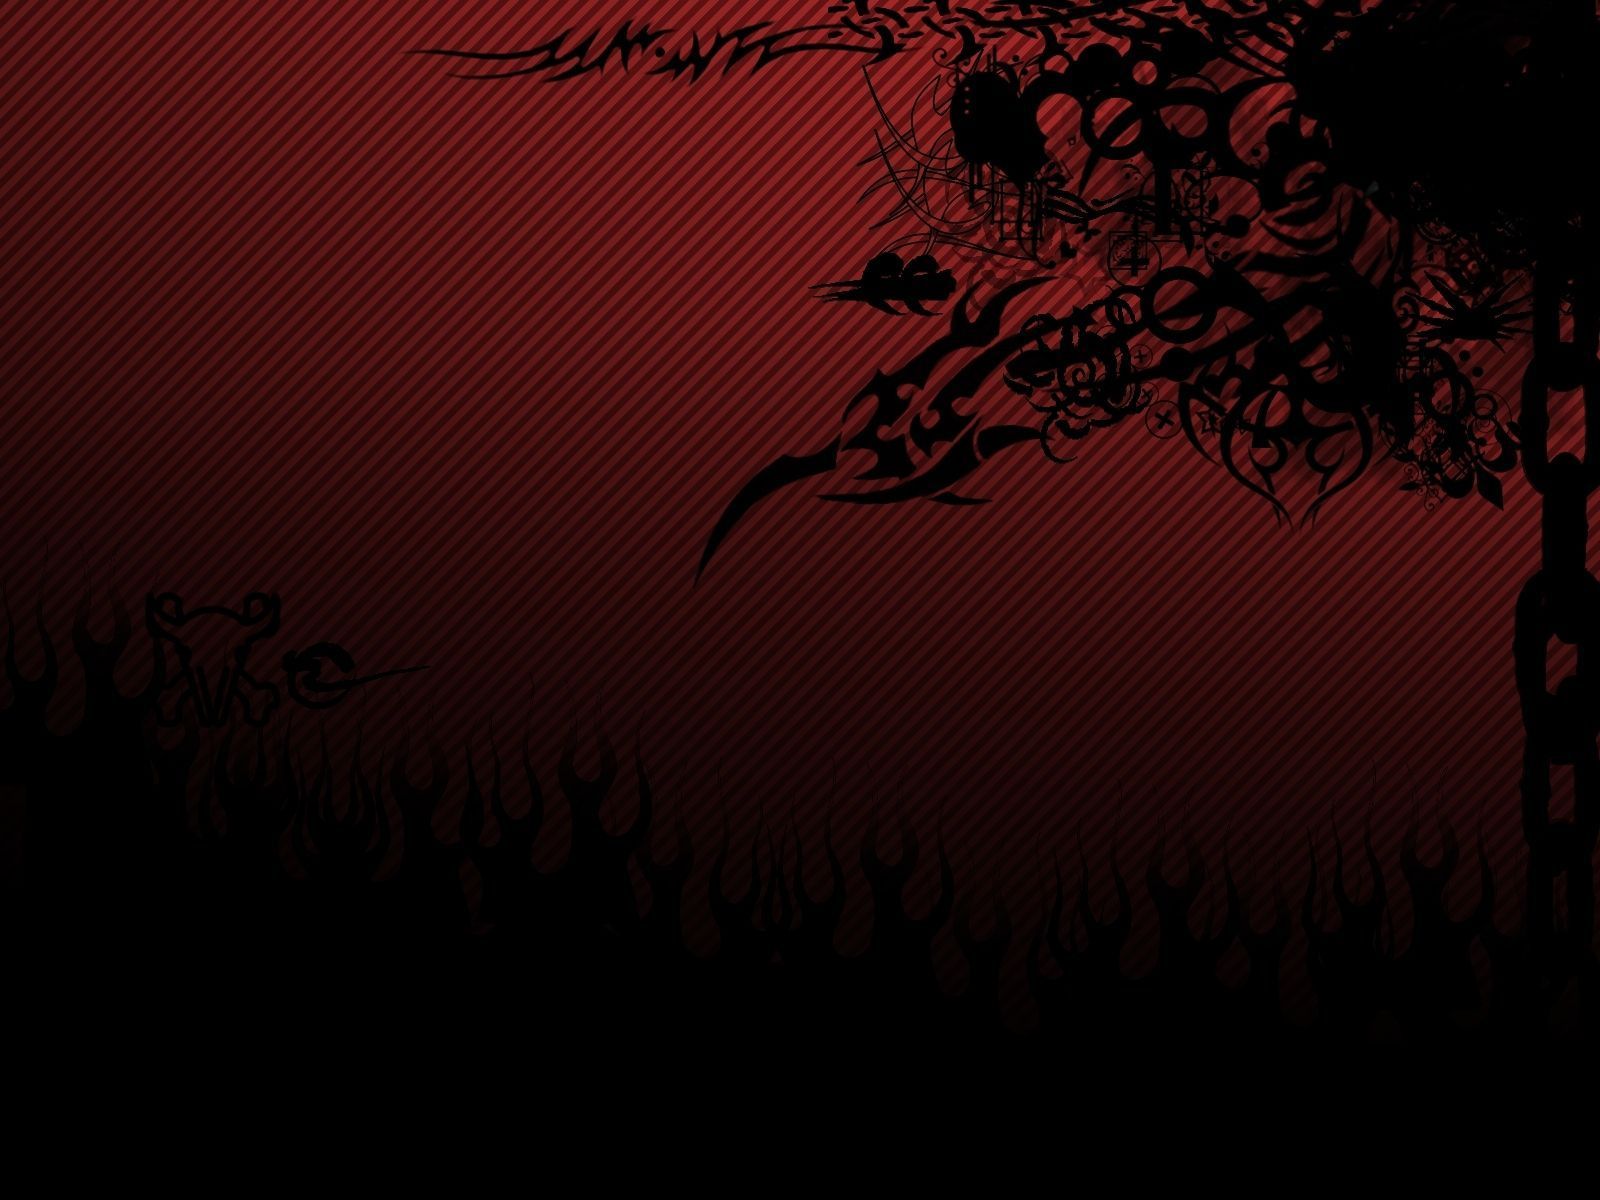 World Wallpaper: cool black and red background